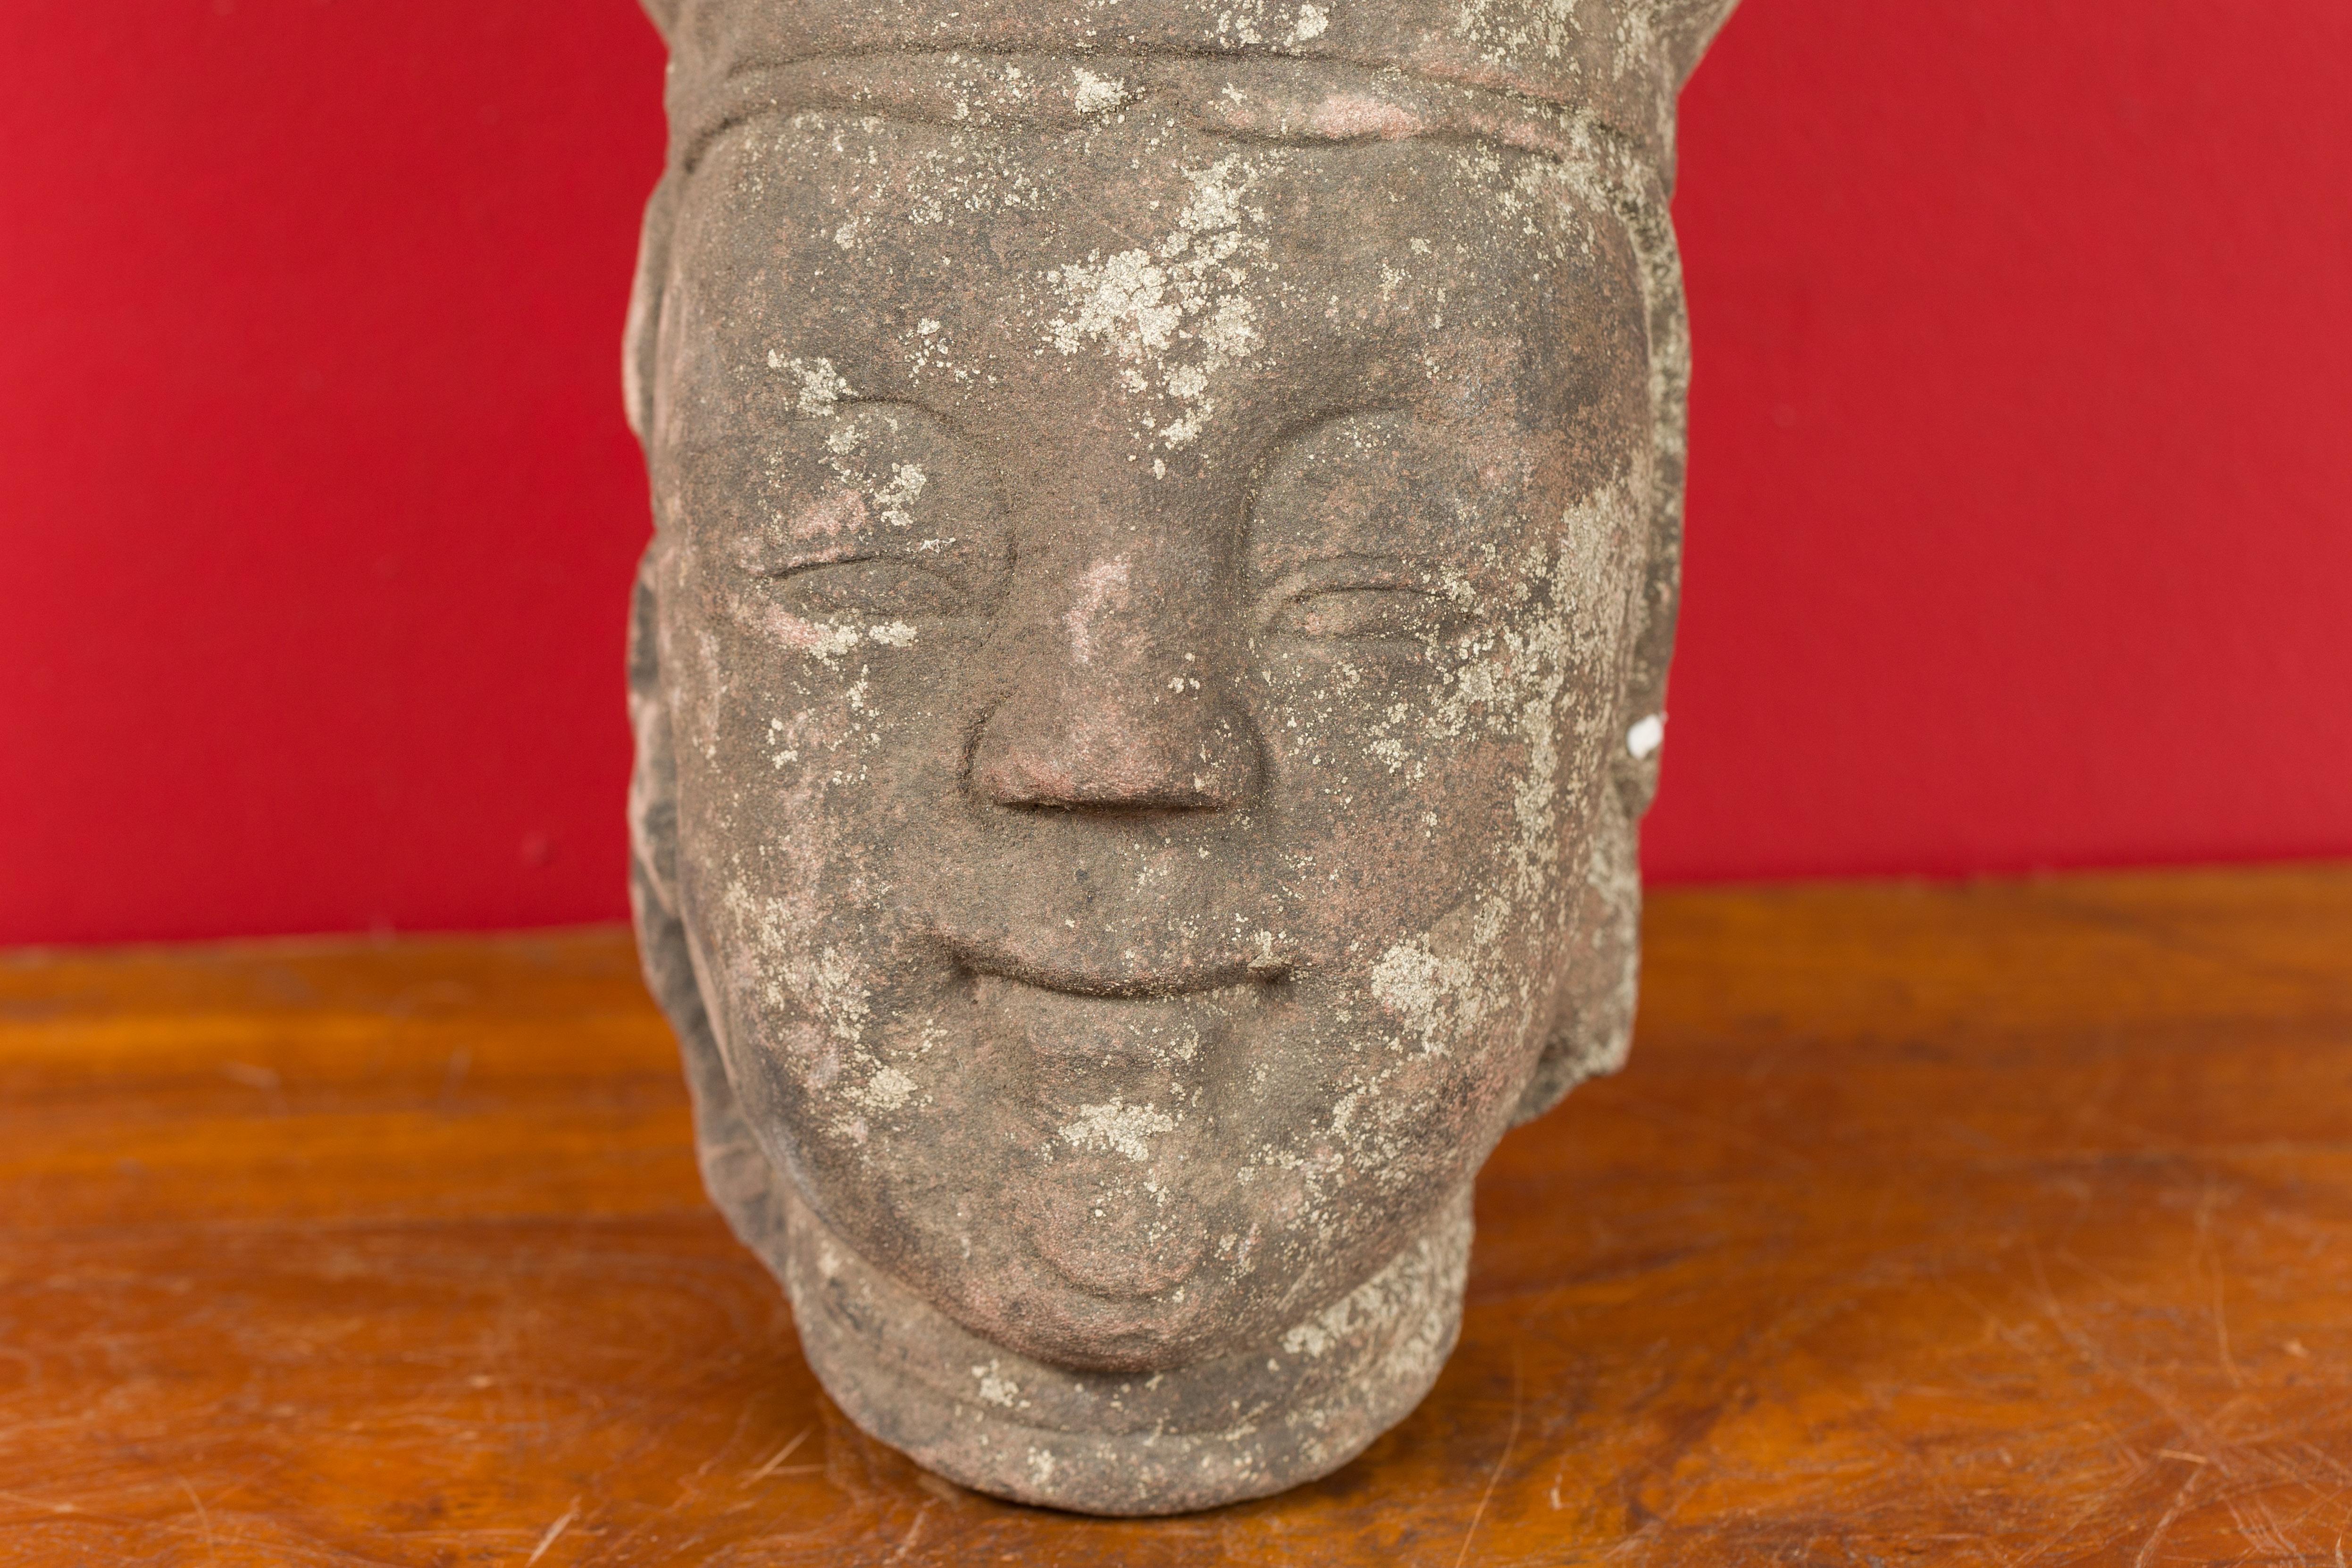 19th Century Antique Chinese Carved Stone Head Sculpture Depicting a Religious Figure